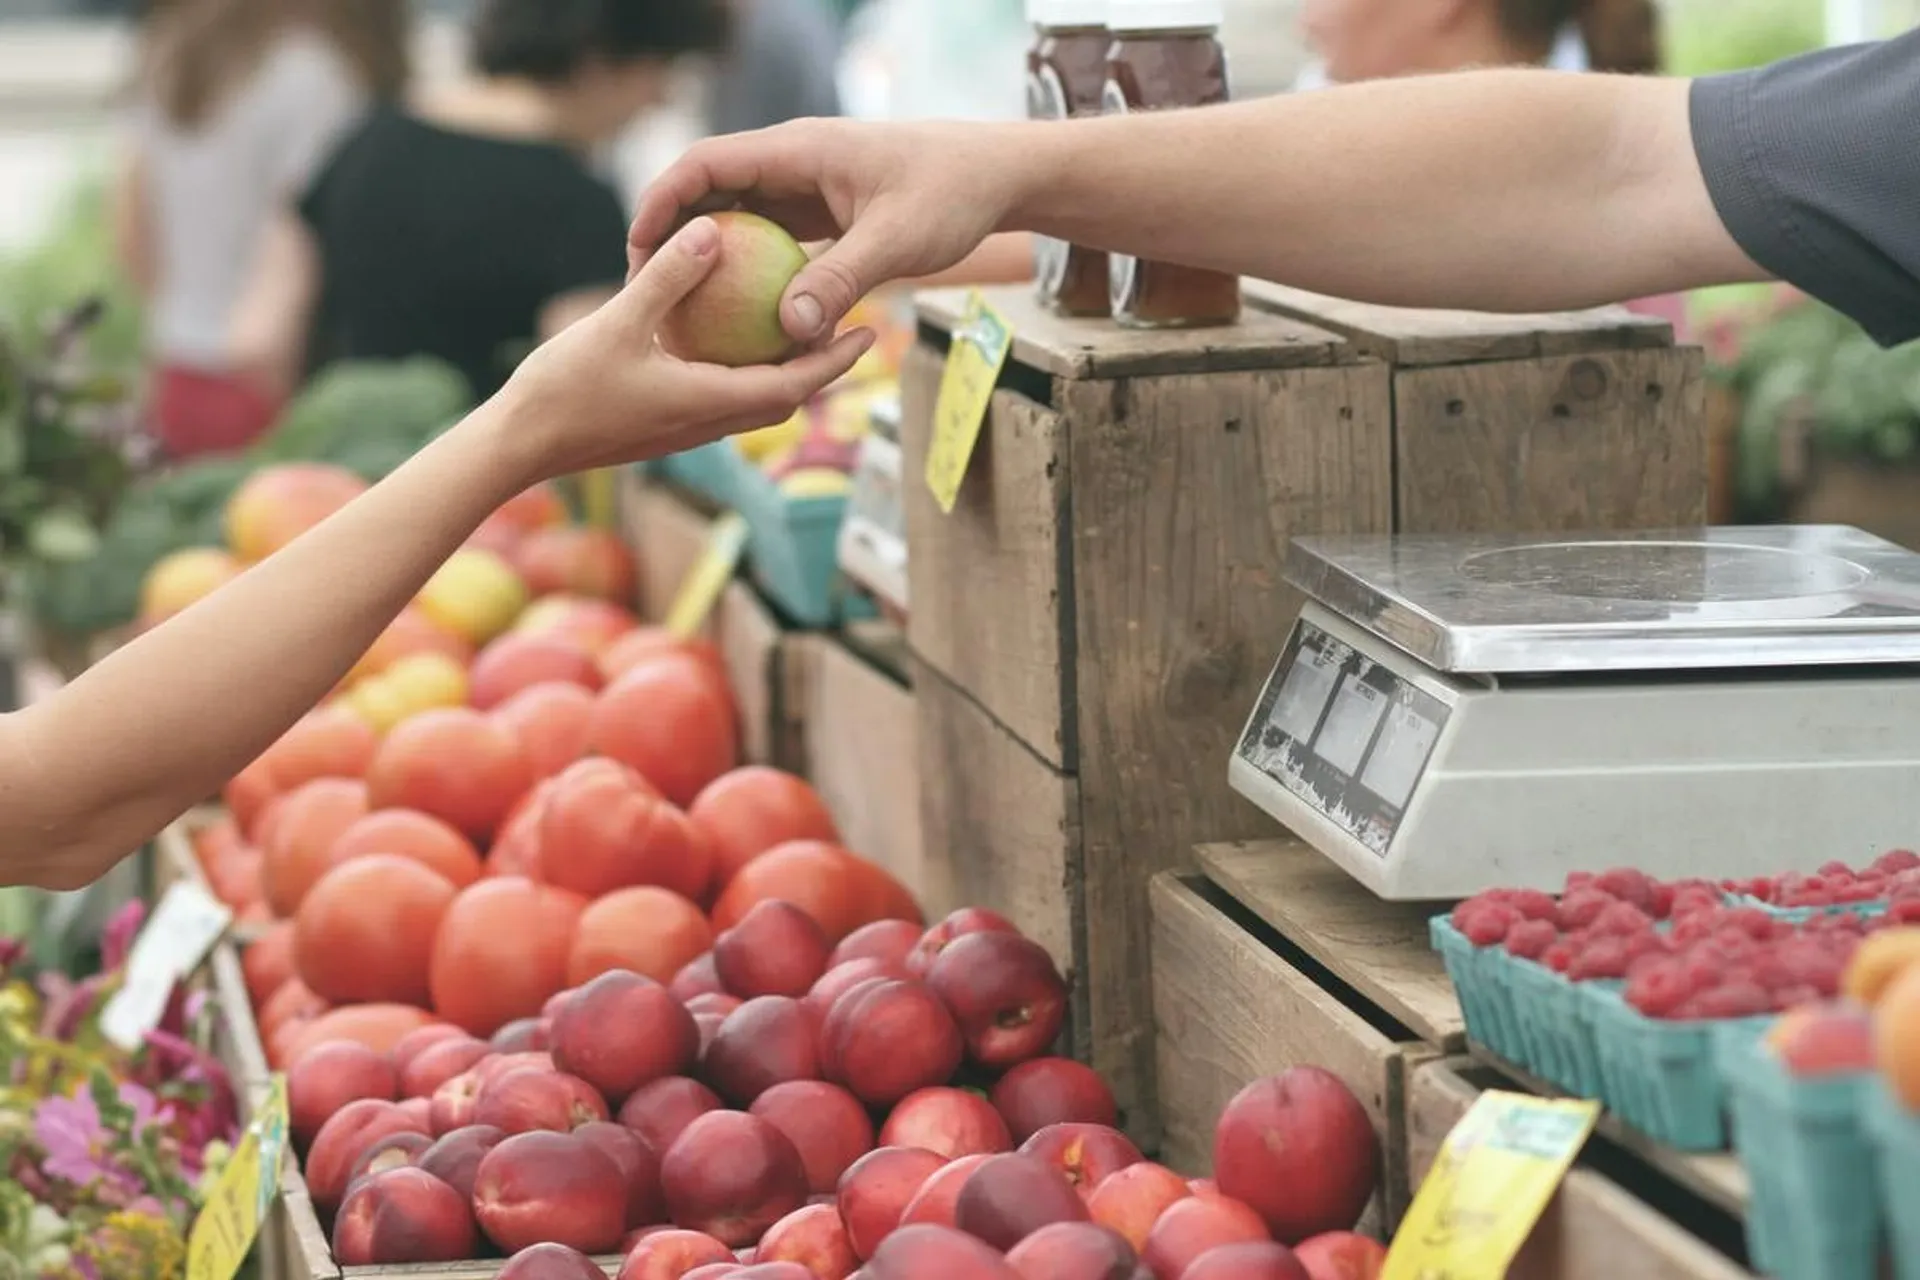 Expert tips to save money on groceries in Canada